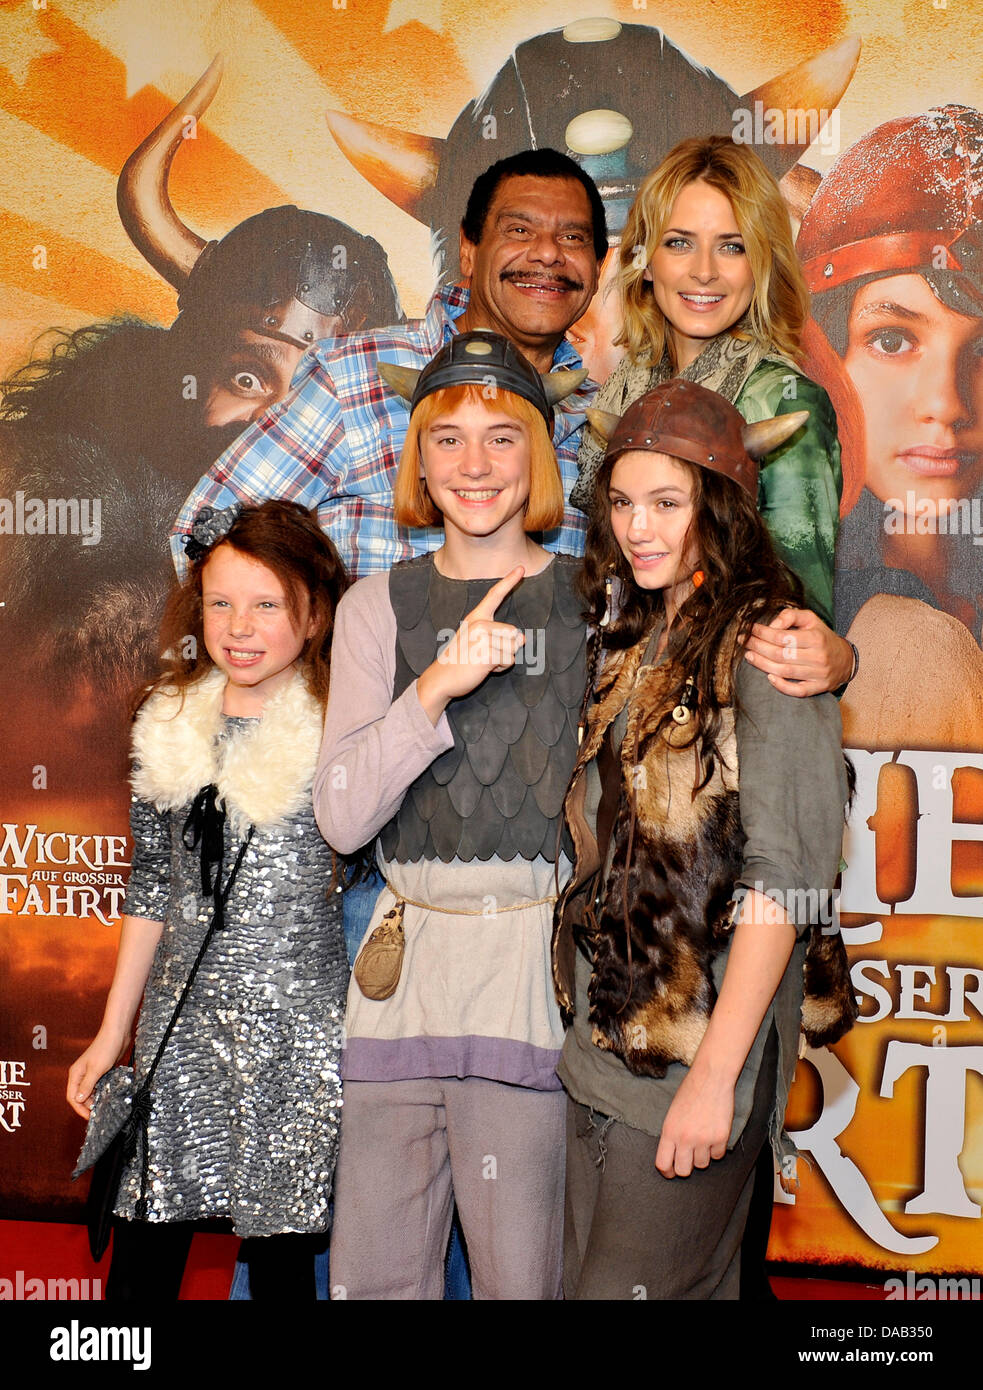 Jadea Mercedes Diaz (L-R), Jonas Haemmerle, Valeria Eisenbart Guenther Kaufmann and Eva Padberg arrive for the premiere of their movie 'Wickie auf grosser Fahrt' ('Wickie on tour') in Munich, Germany, 25 September 2011. The follower of 'Wicki and the strong men' will be aired on 29 September 2011. Photo: URSULA DUEREN Stock Photo